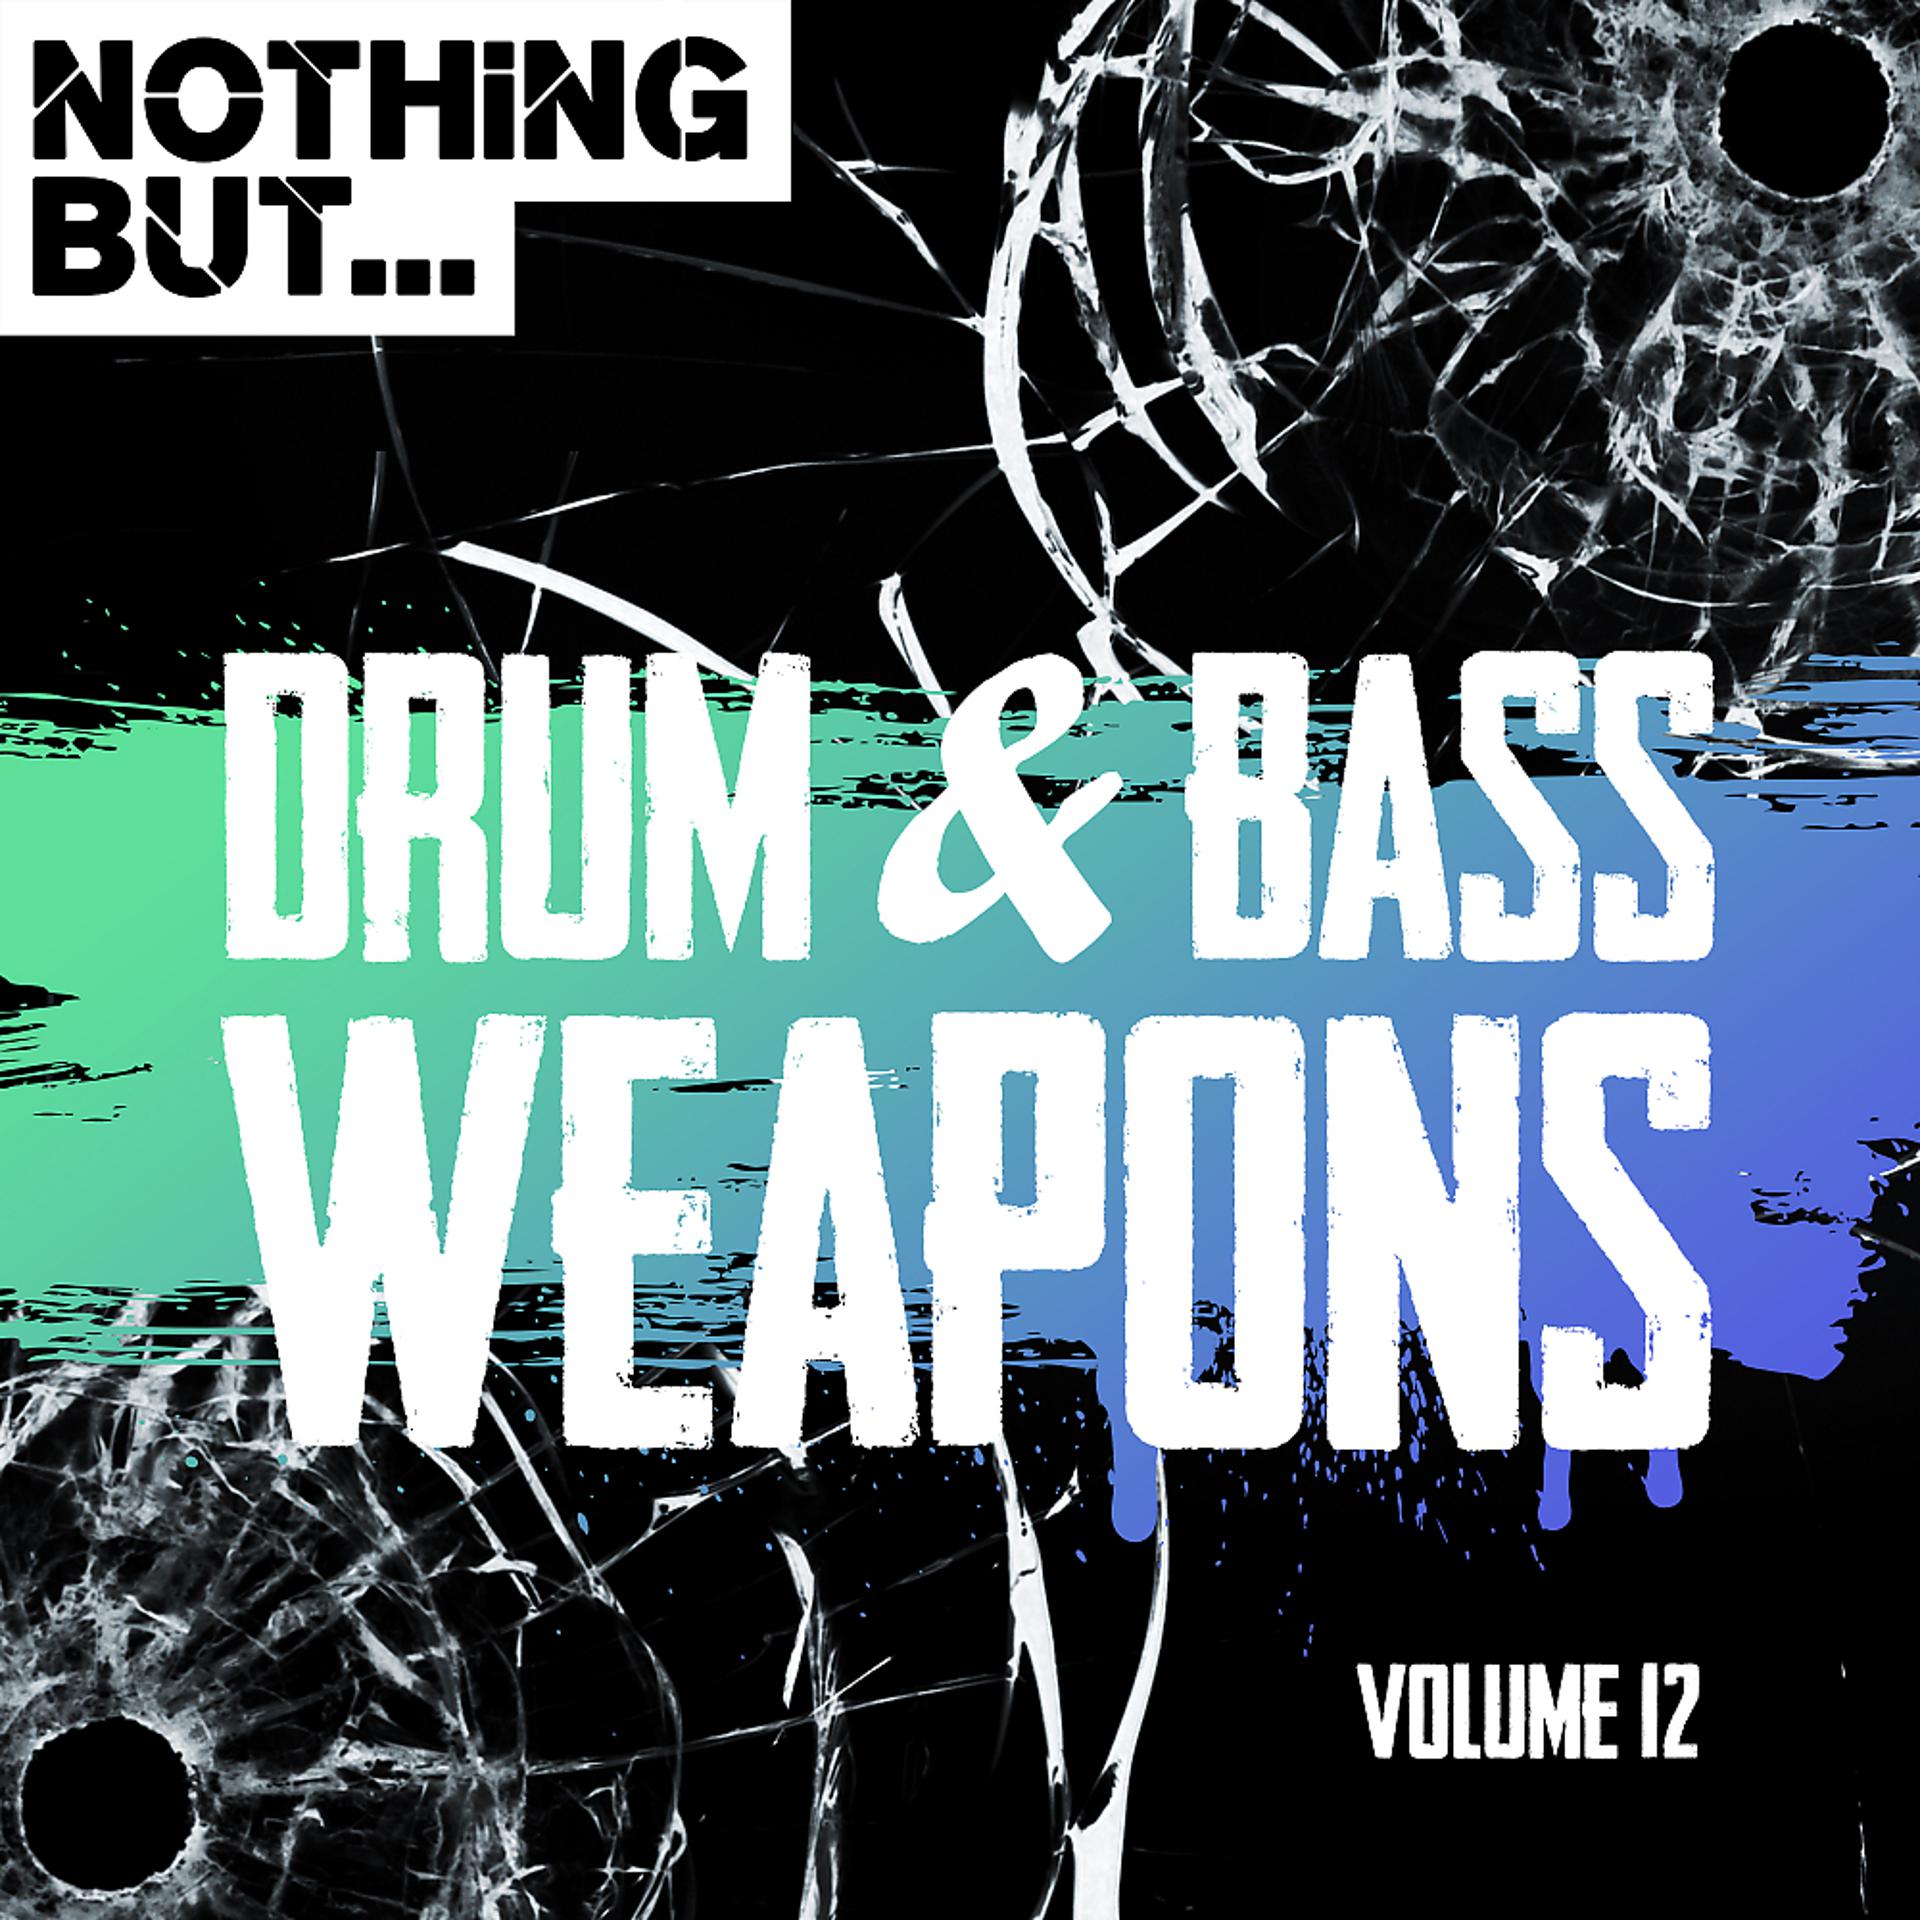 Постер альбома Nothing But... Drum & Bass Weapons, Vol. 12